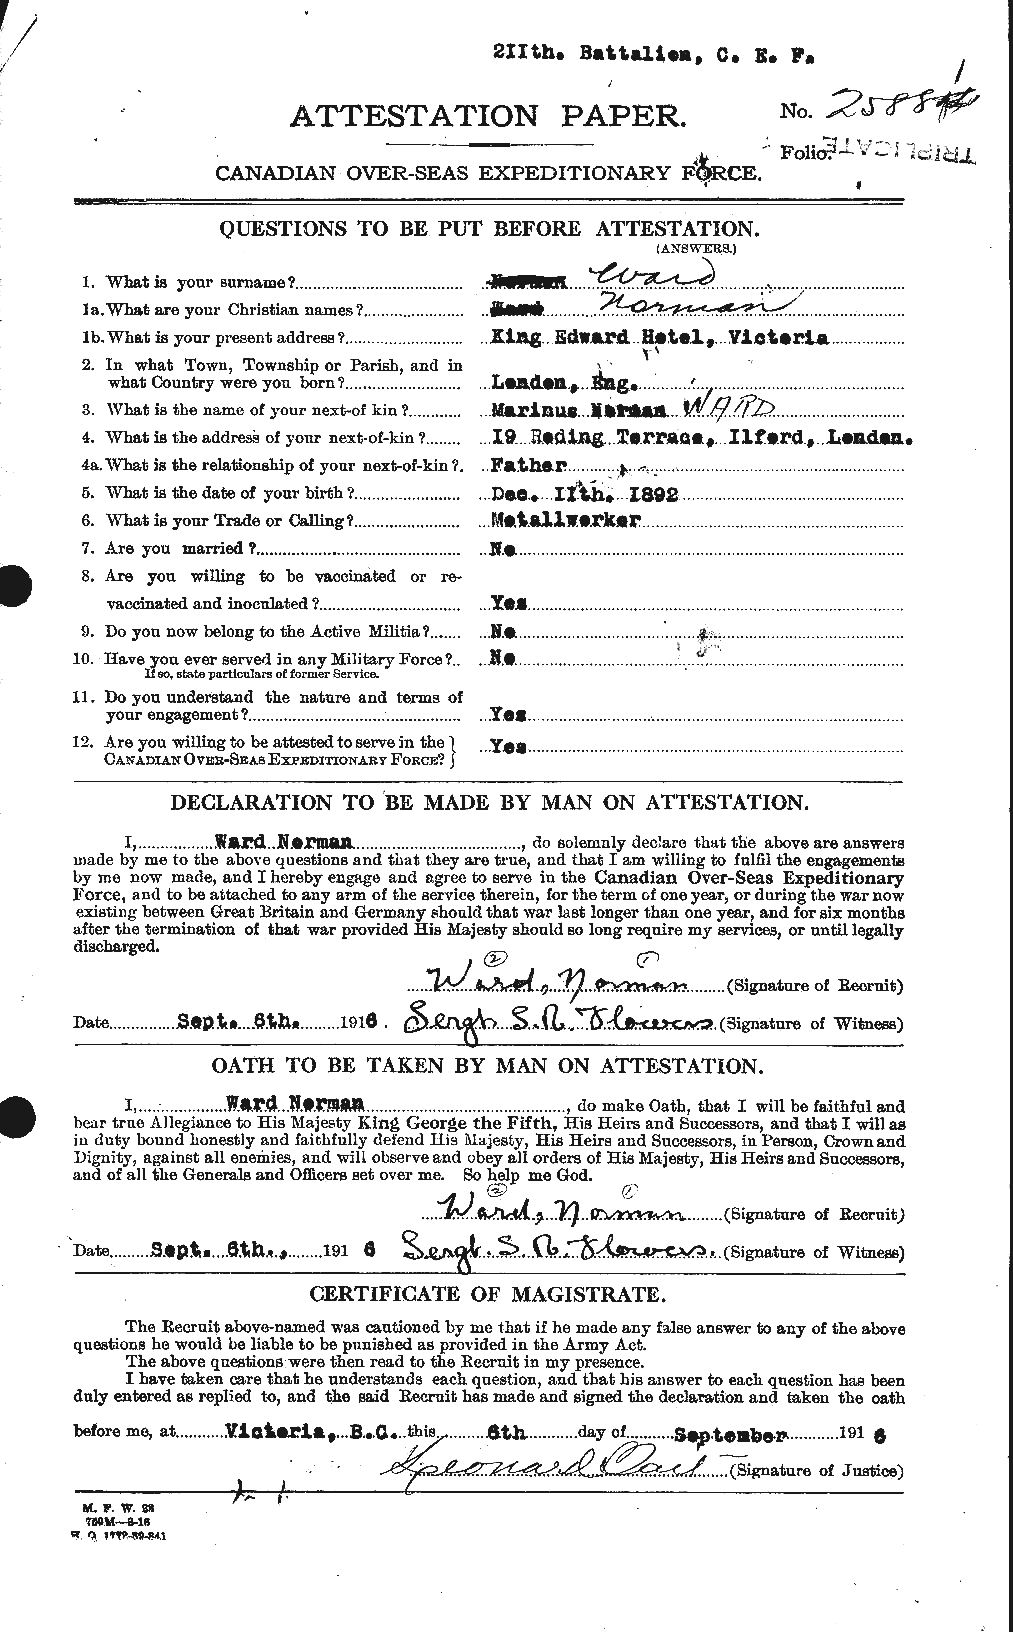 Personnel Records of the First World War - CEF 659612a